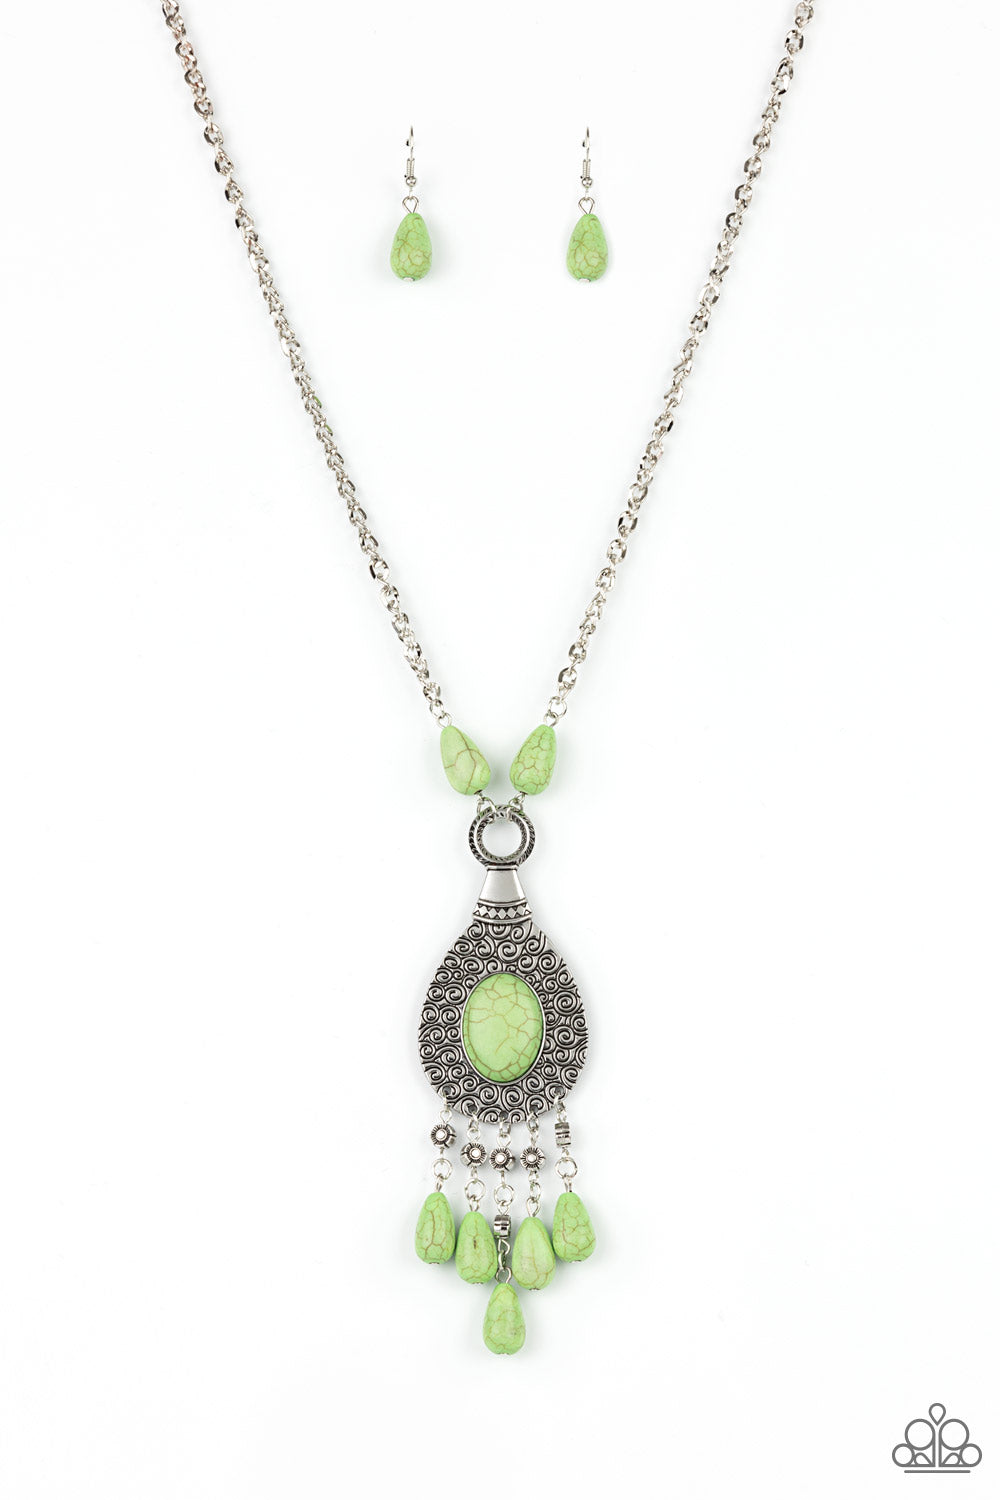 Paparazzi - Cowgirl Couture - Green - An Apple Green oval stone sits center stage surrounded by swirly designs stamped into a wide silver frame. A fringe of silver floral beads culminating in Apple Green stones swings like a pendulum at the end of a lengthened silver chain for a fashionable finish.